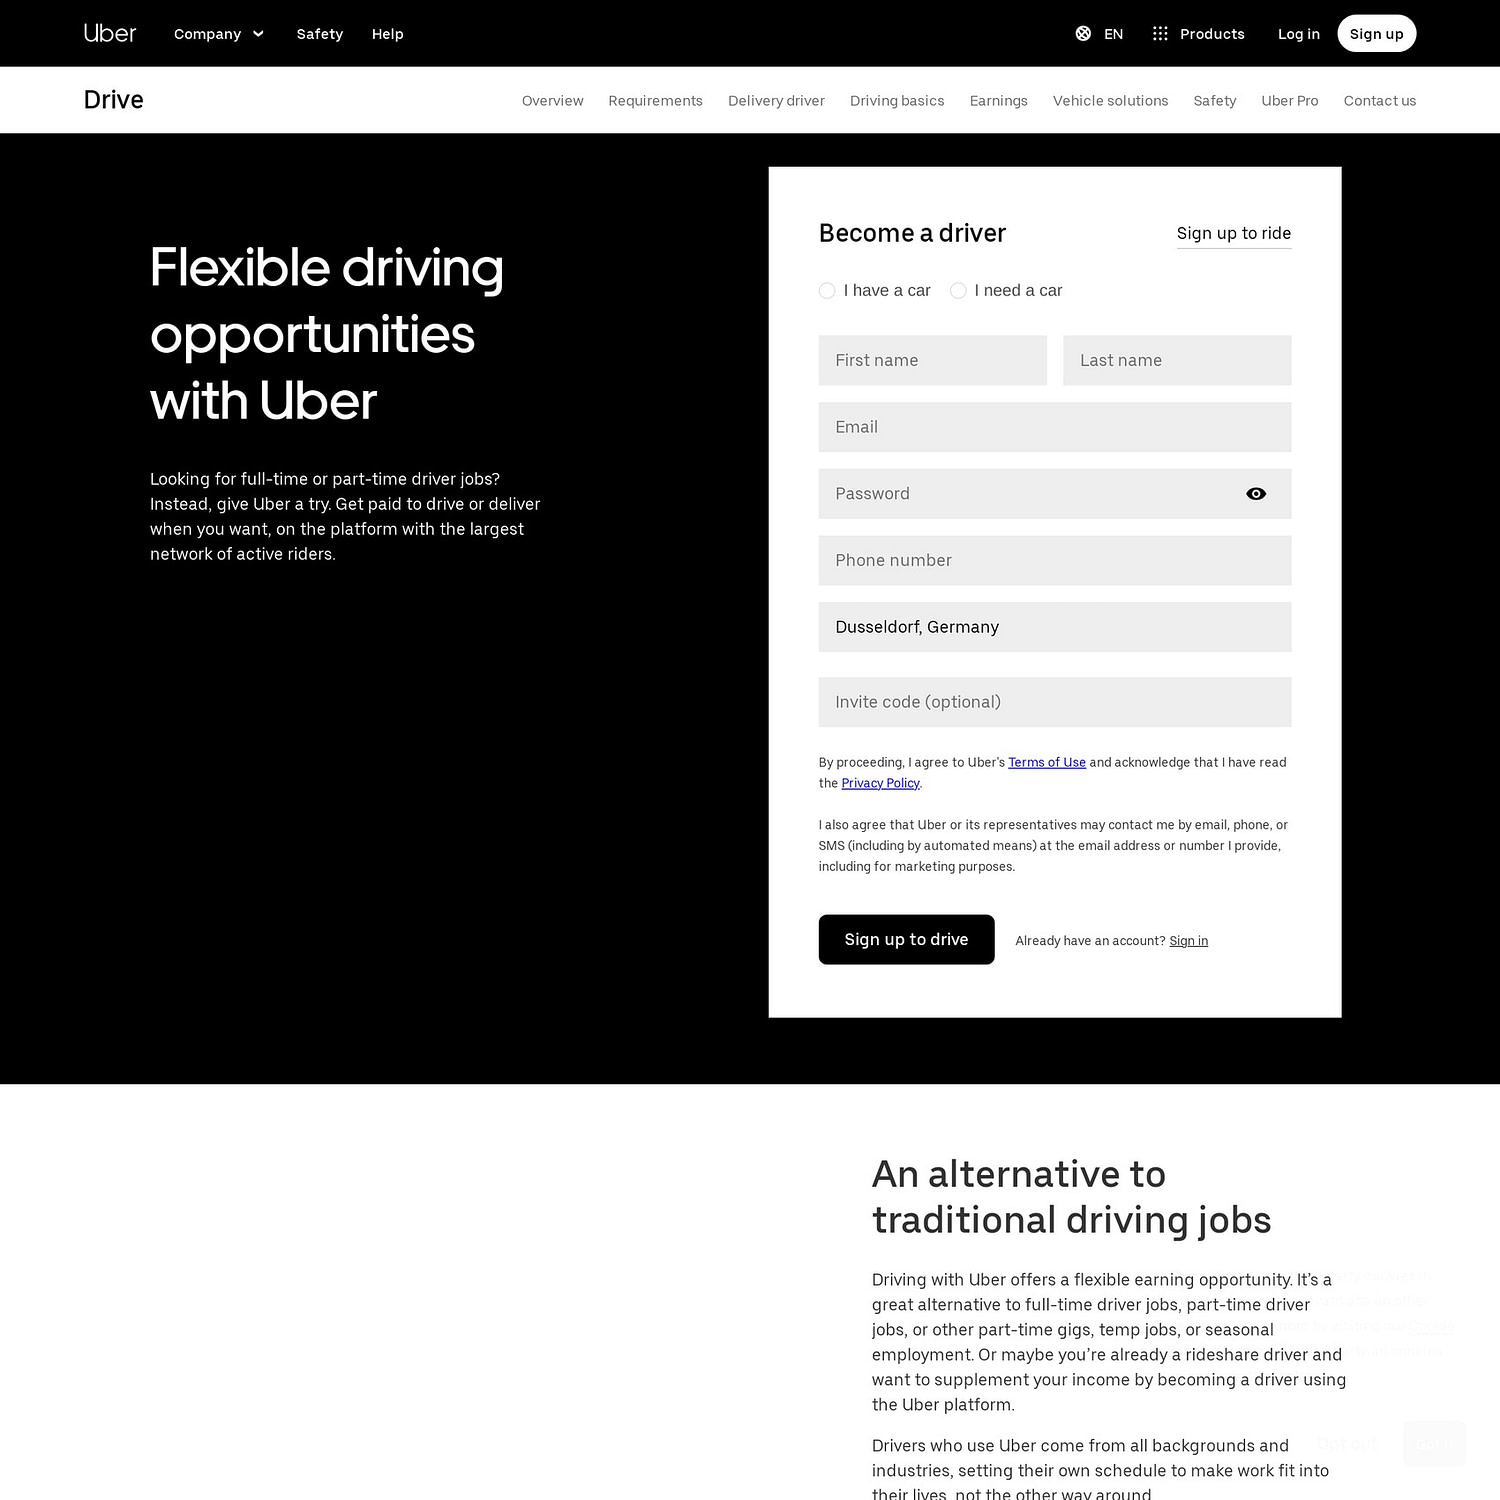 landing page examples: Uber